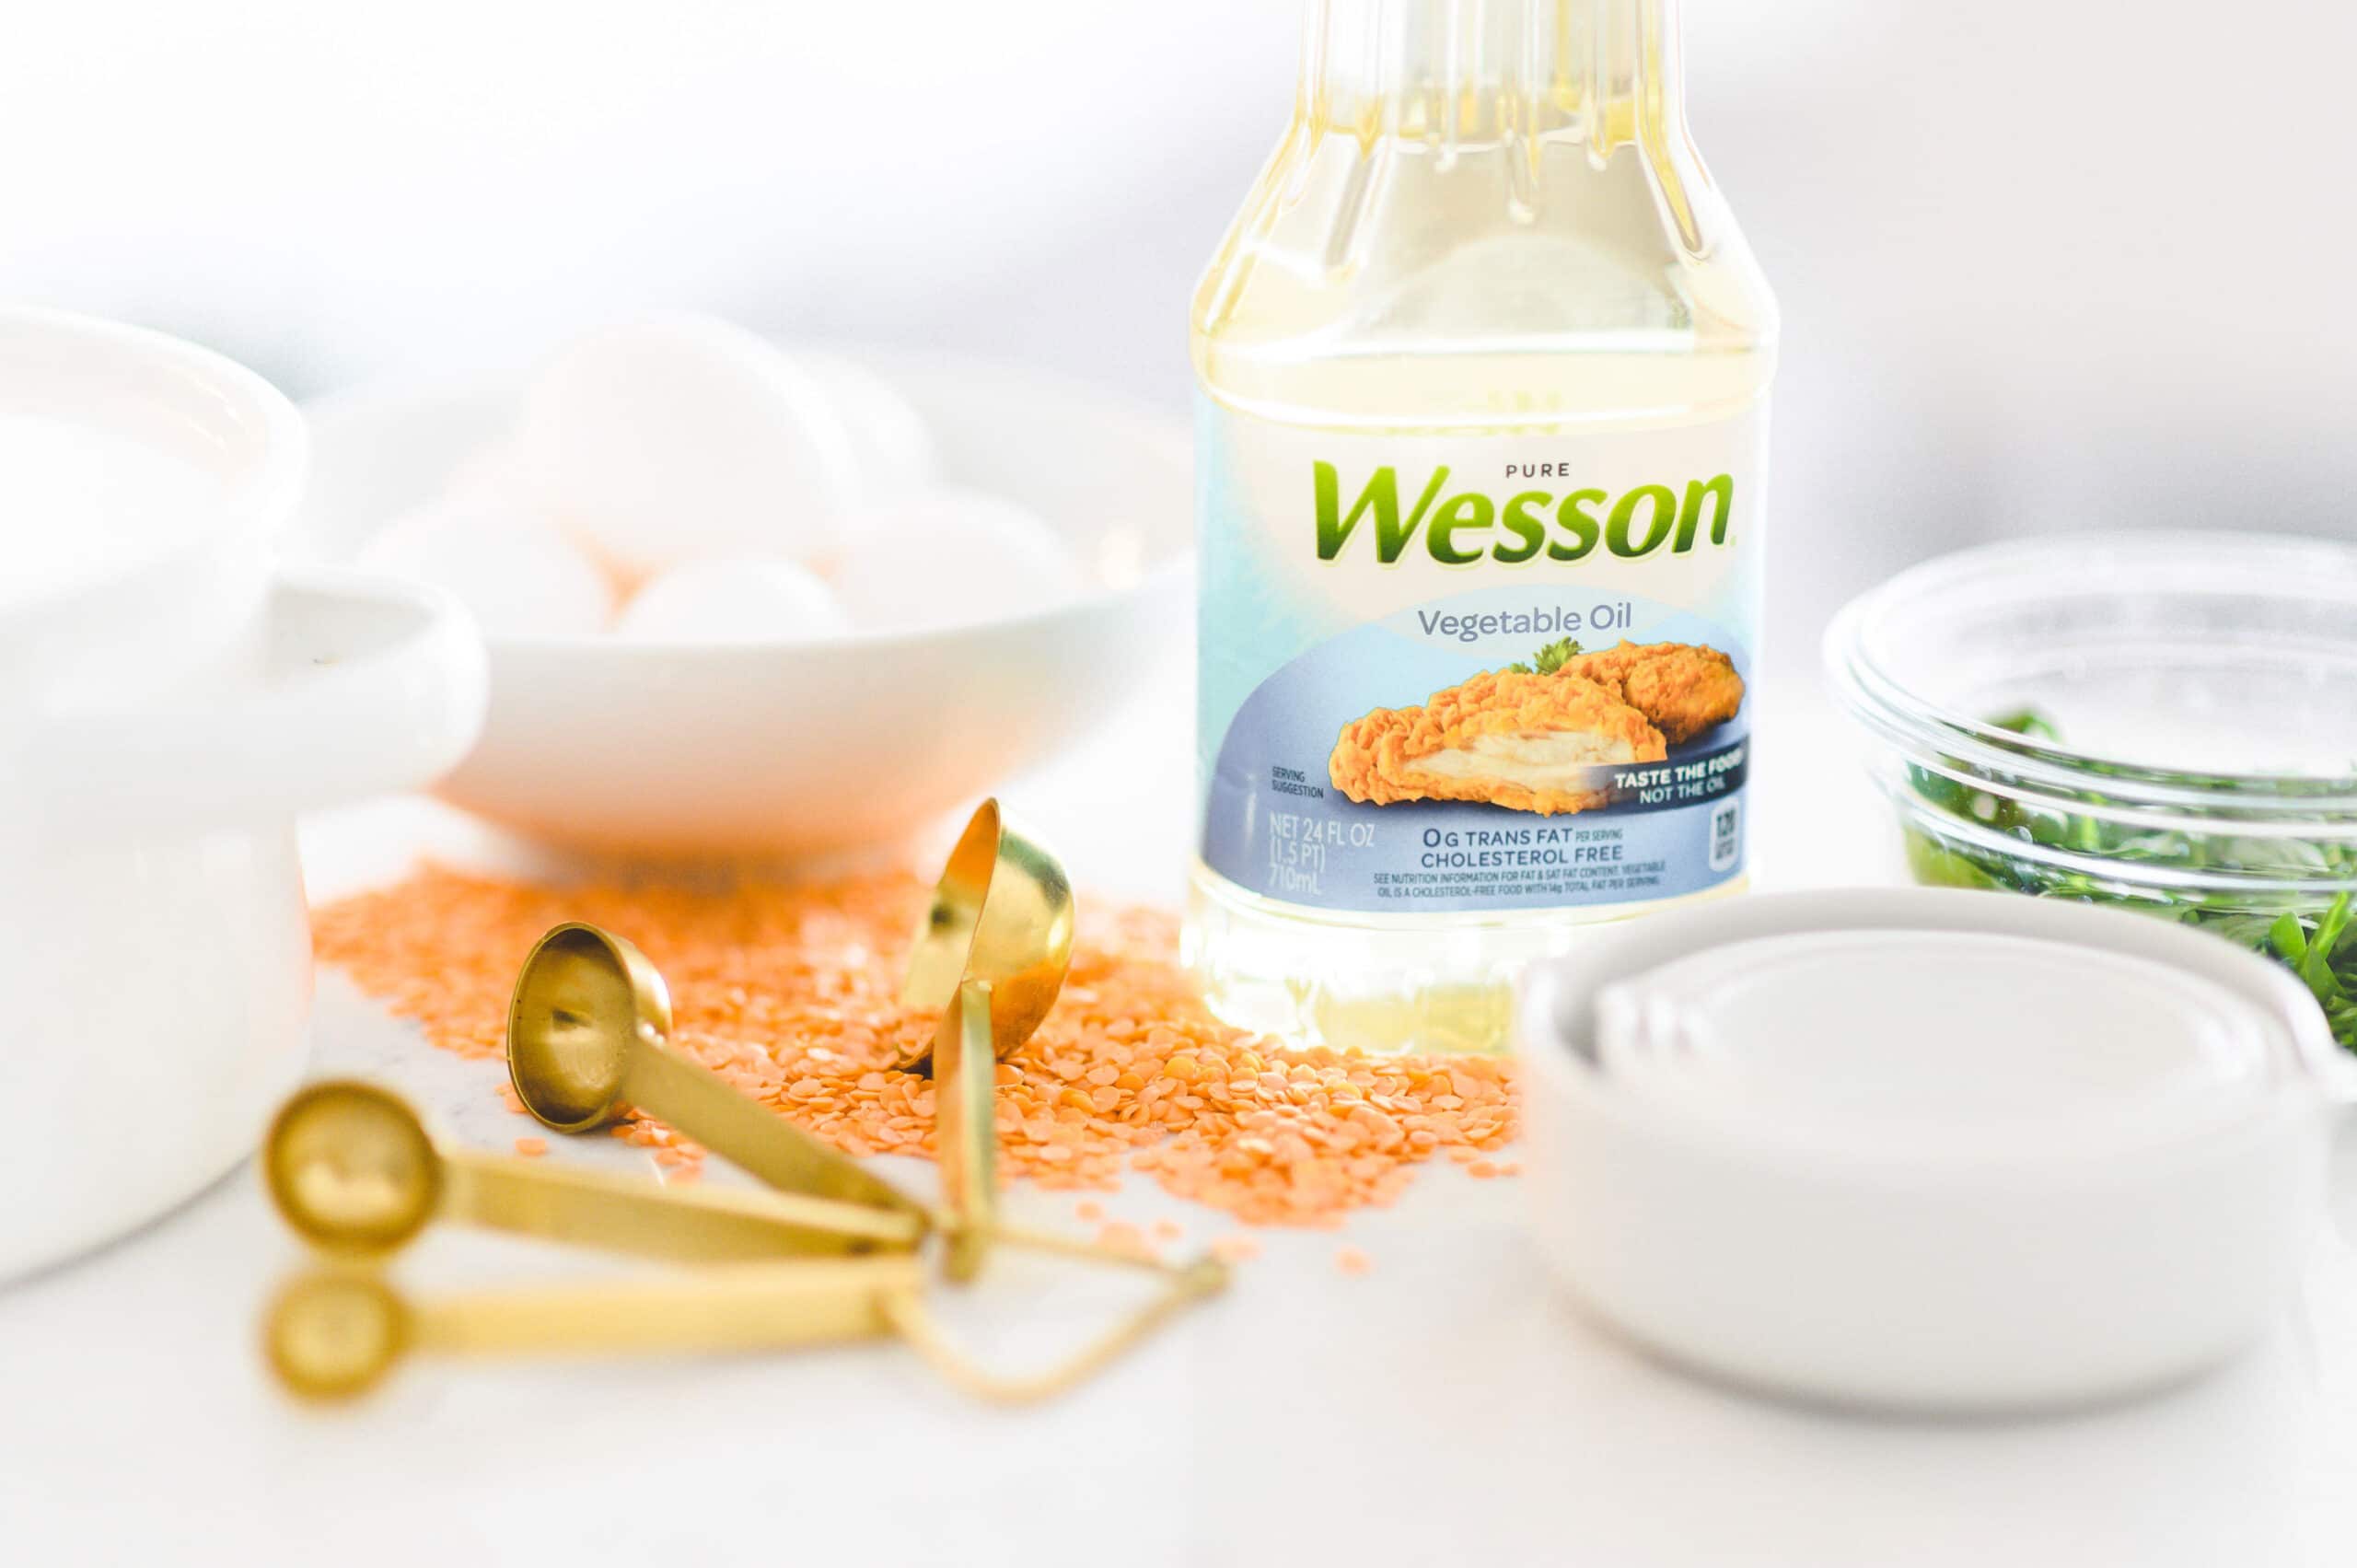 Featured image for “2019 – Richardson International completes the acquisition of a leading U.S. cooking oil brand, Wesson®, and Memphis production facility”